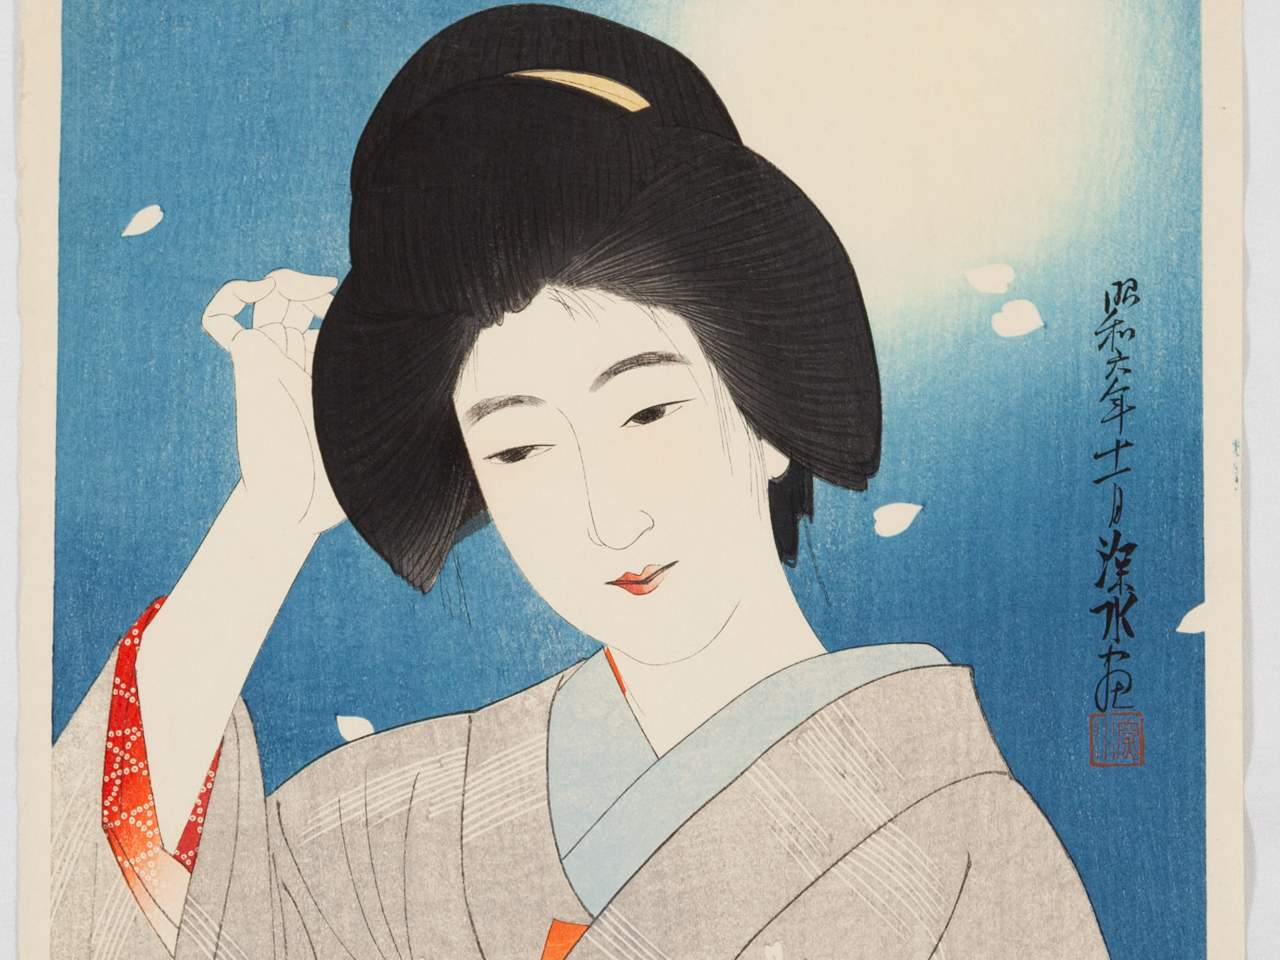 In Turin, Italy's first exhibition dedicated to shinhanga, Japan's new woodcuts